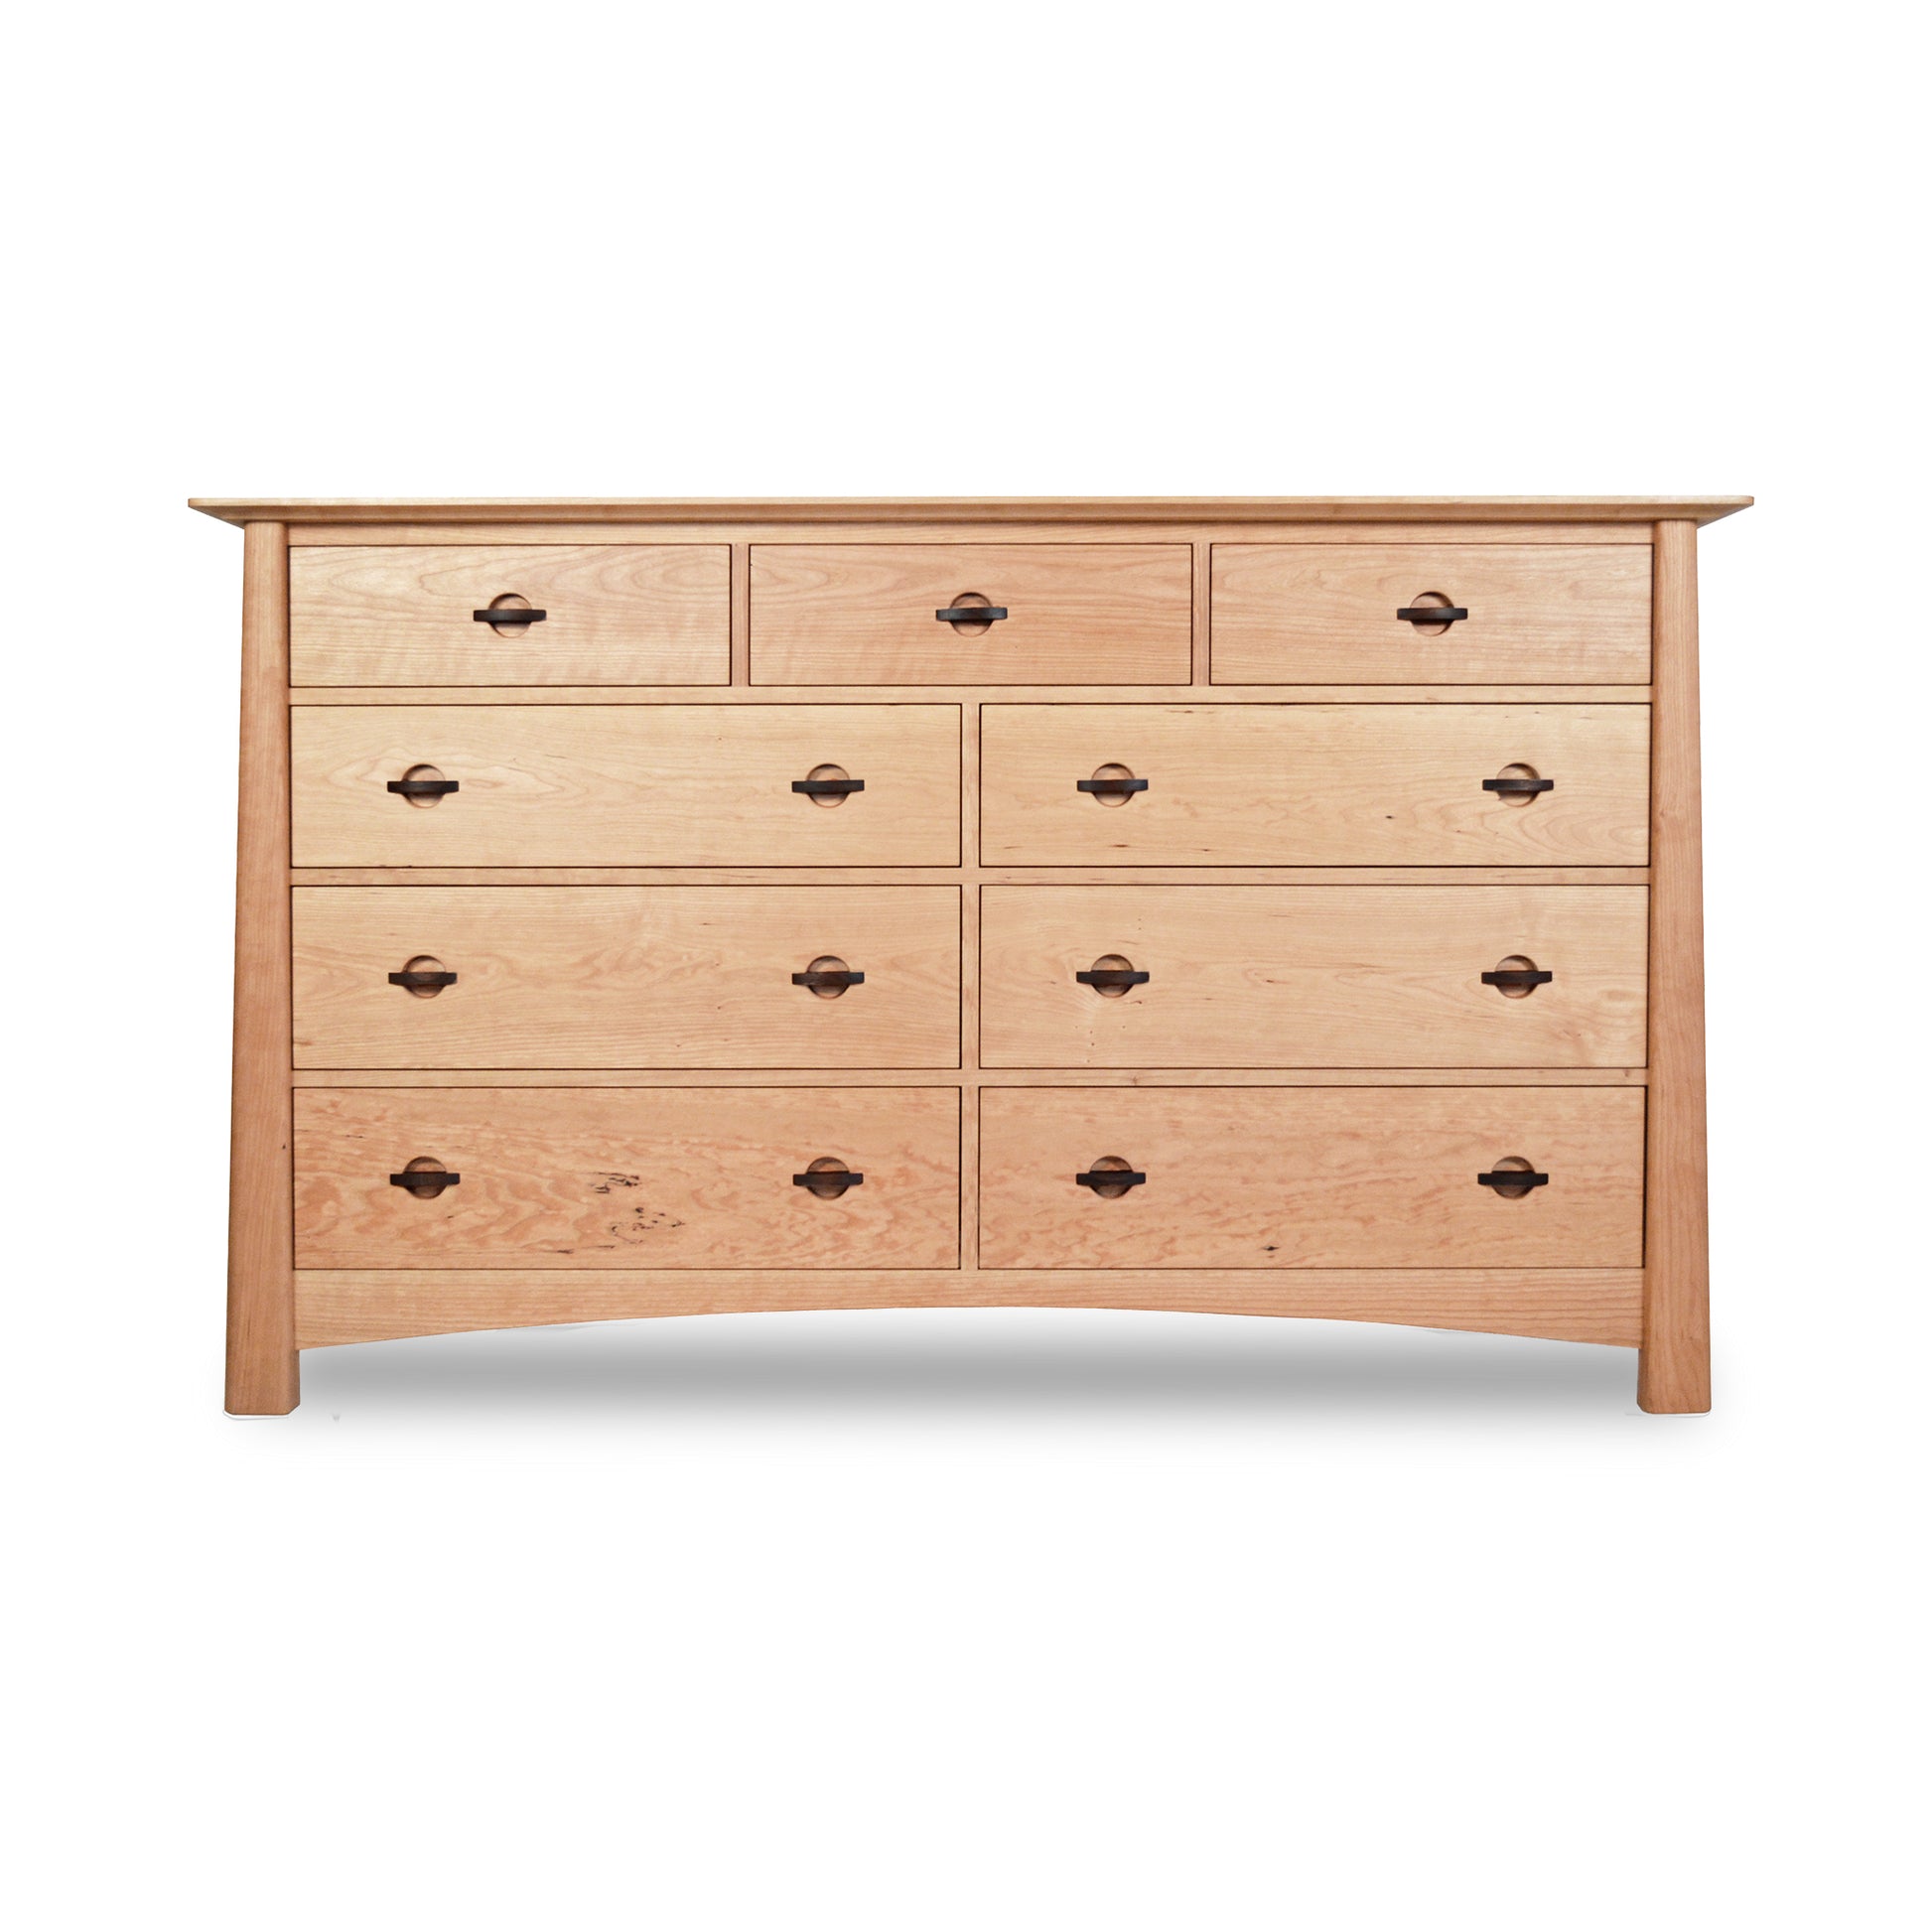 A Maple Corner Woodworks Cherry Moon 9-Drawer Dresser, with nine drawers, featuring a larger size for the bottom row and smaller ones above, all with round metal handles, set against a white background.